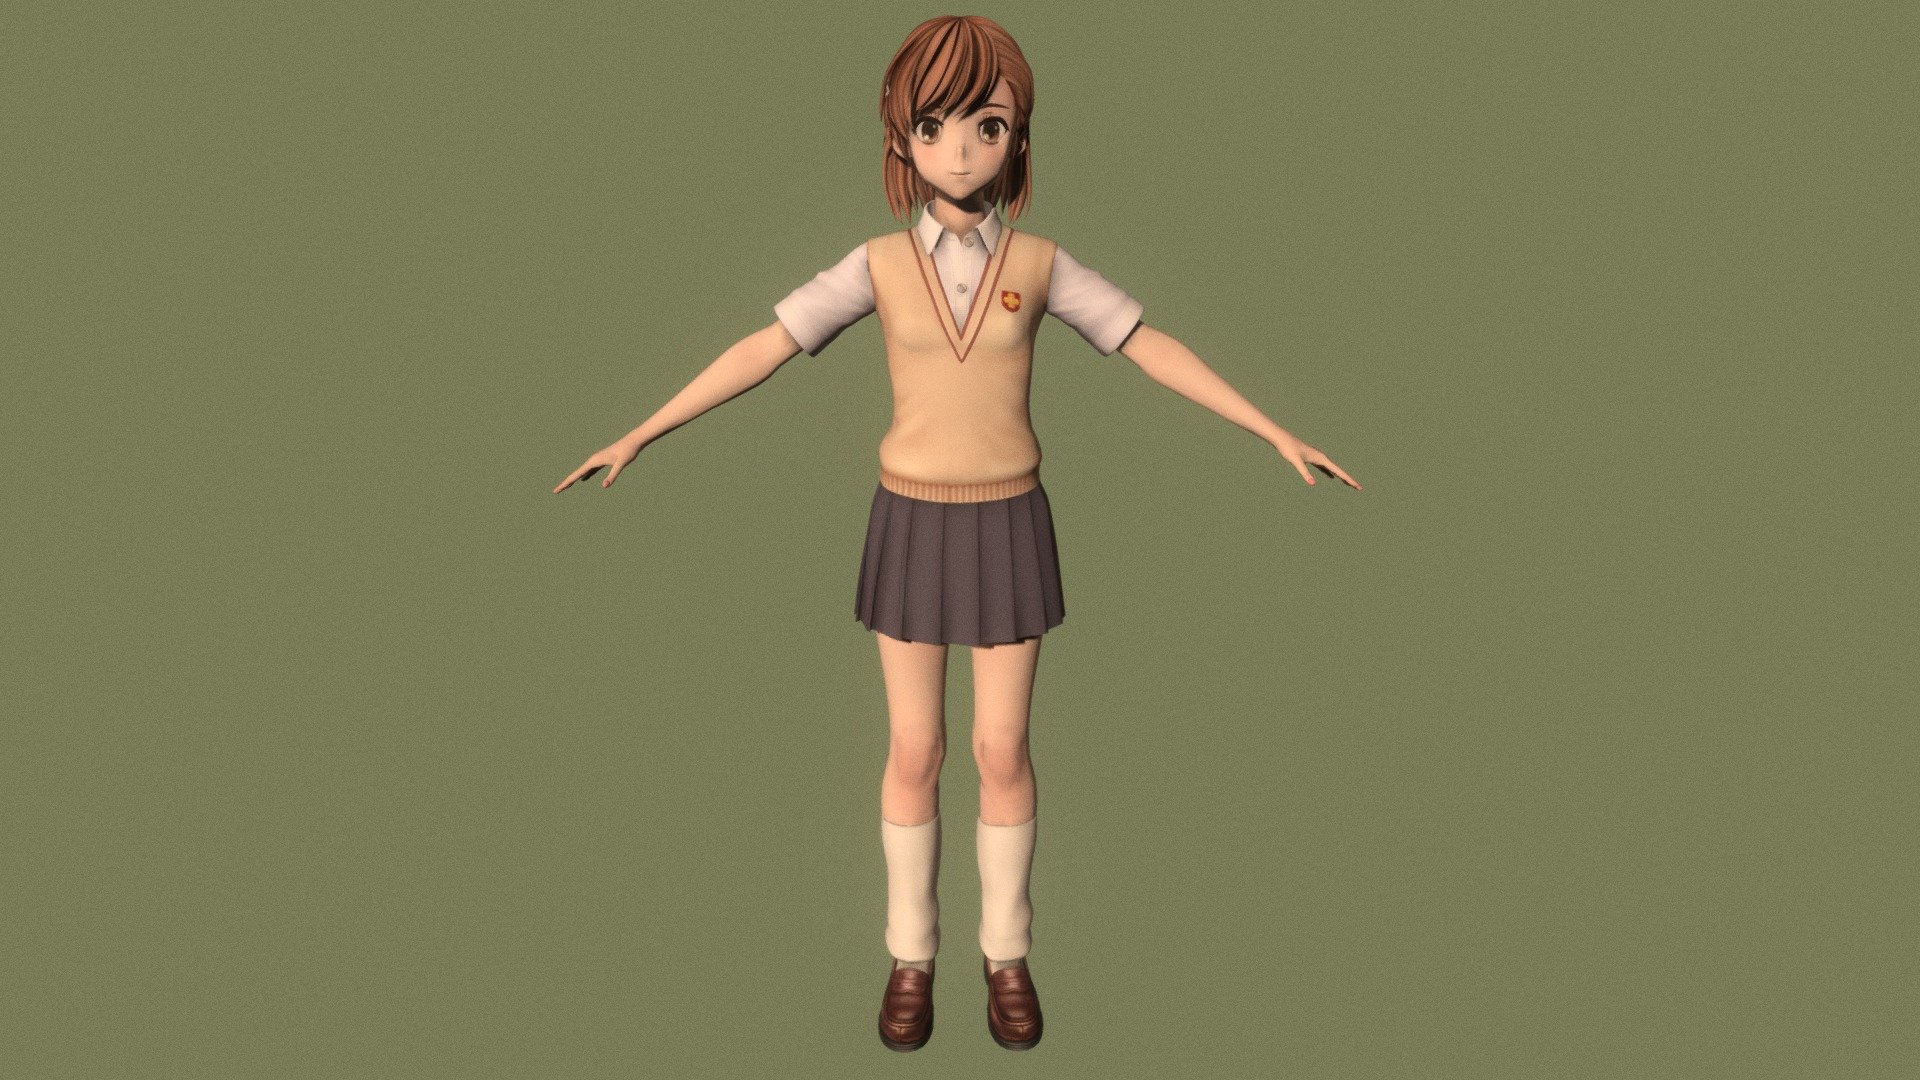 T-pose rigged model of anime girl Misaka Mikoto (A Certain Scientific Railgun).

Body and clothings are rigged and skinned by 3ds Max CAT system.

Eye direction and facial animation controlled by Morpher modifier / Shape Keys / Blendshape.

This product include .FBX (ver. 7200) and .MAX (ver. 2010) files.

3ds Max version is turbosmoothed to give a high quality render (as you can see here).

Original main body mesh have ~7.000 polys.

This 3D model may need some tweaking to adapt the rig system to games engine and other platforms.

I support convert model to various file formats (the rig data will be lost in this process): 3DS; AI; ASE; DAE; DWF; DWG; DXF; FLT; HTR; IGS; M3G; MQO; OBJ; SAT; STL; W3D; WRL; X.

You can buy all of my models in one pack to save cost: https://sketchfab.com/3d-models/all-of-my-anime-girls-c5a56156994e4193b9e8fa21a3b8360b

And I can make commission models.

If you have any questions, please leave a comment or contact me via my email 3d.eden.project@gmail.com 3d model